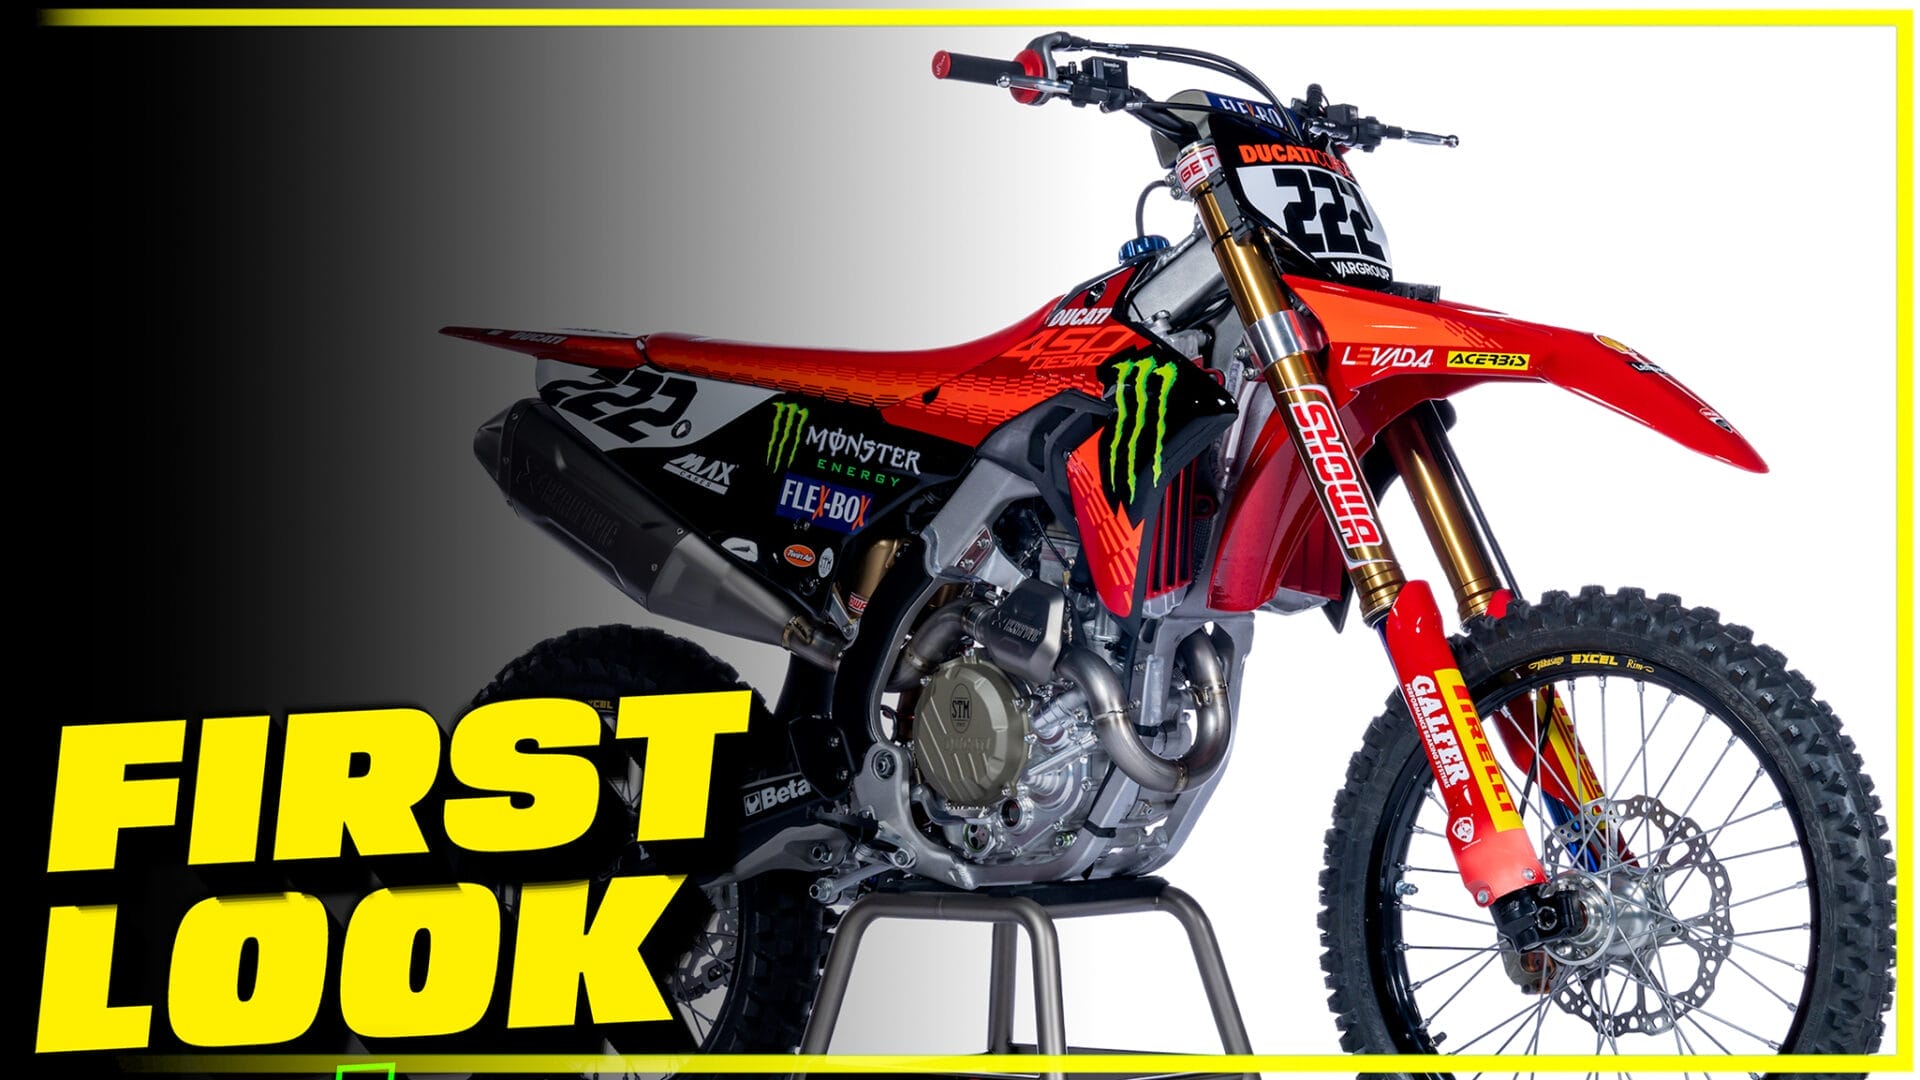 Ducati Desmo 450 MX: A new chapter in motocross?